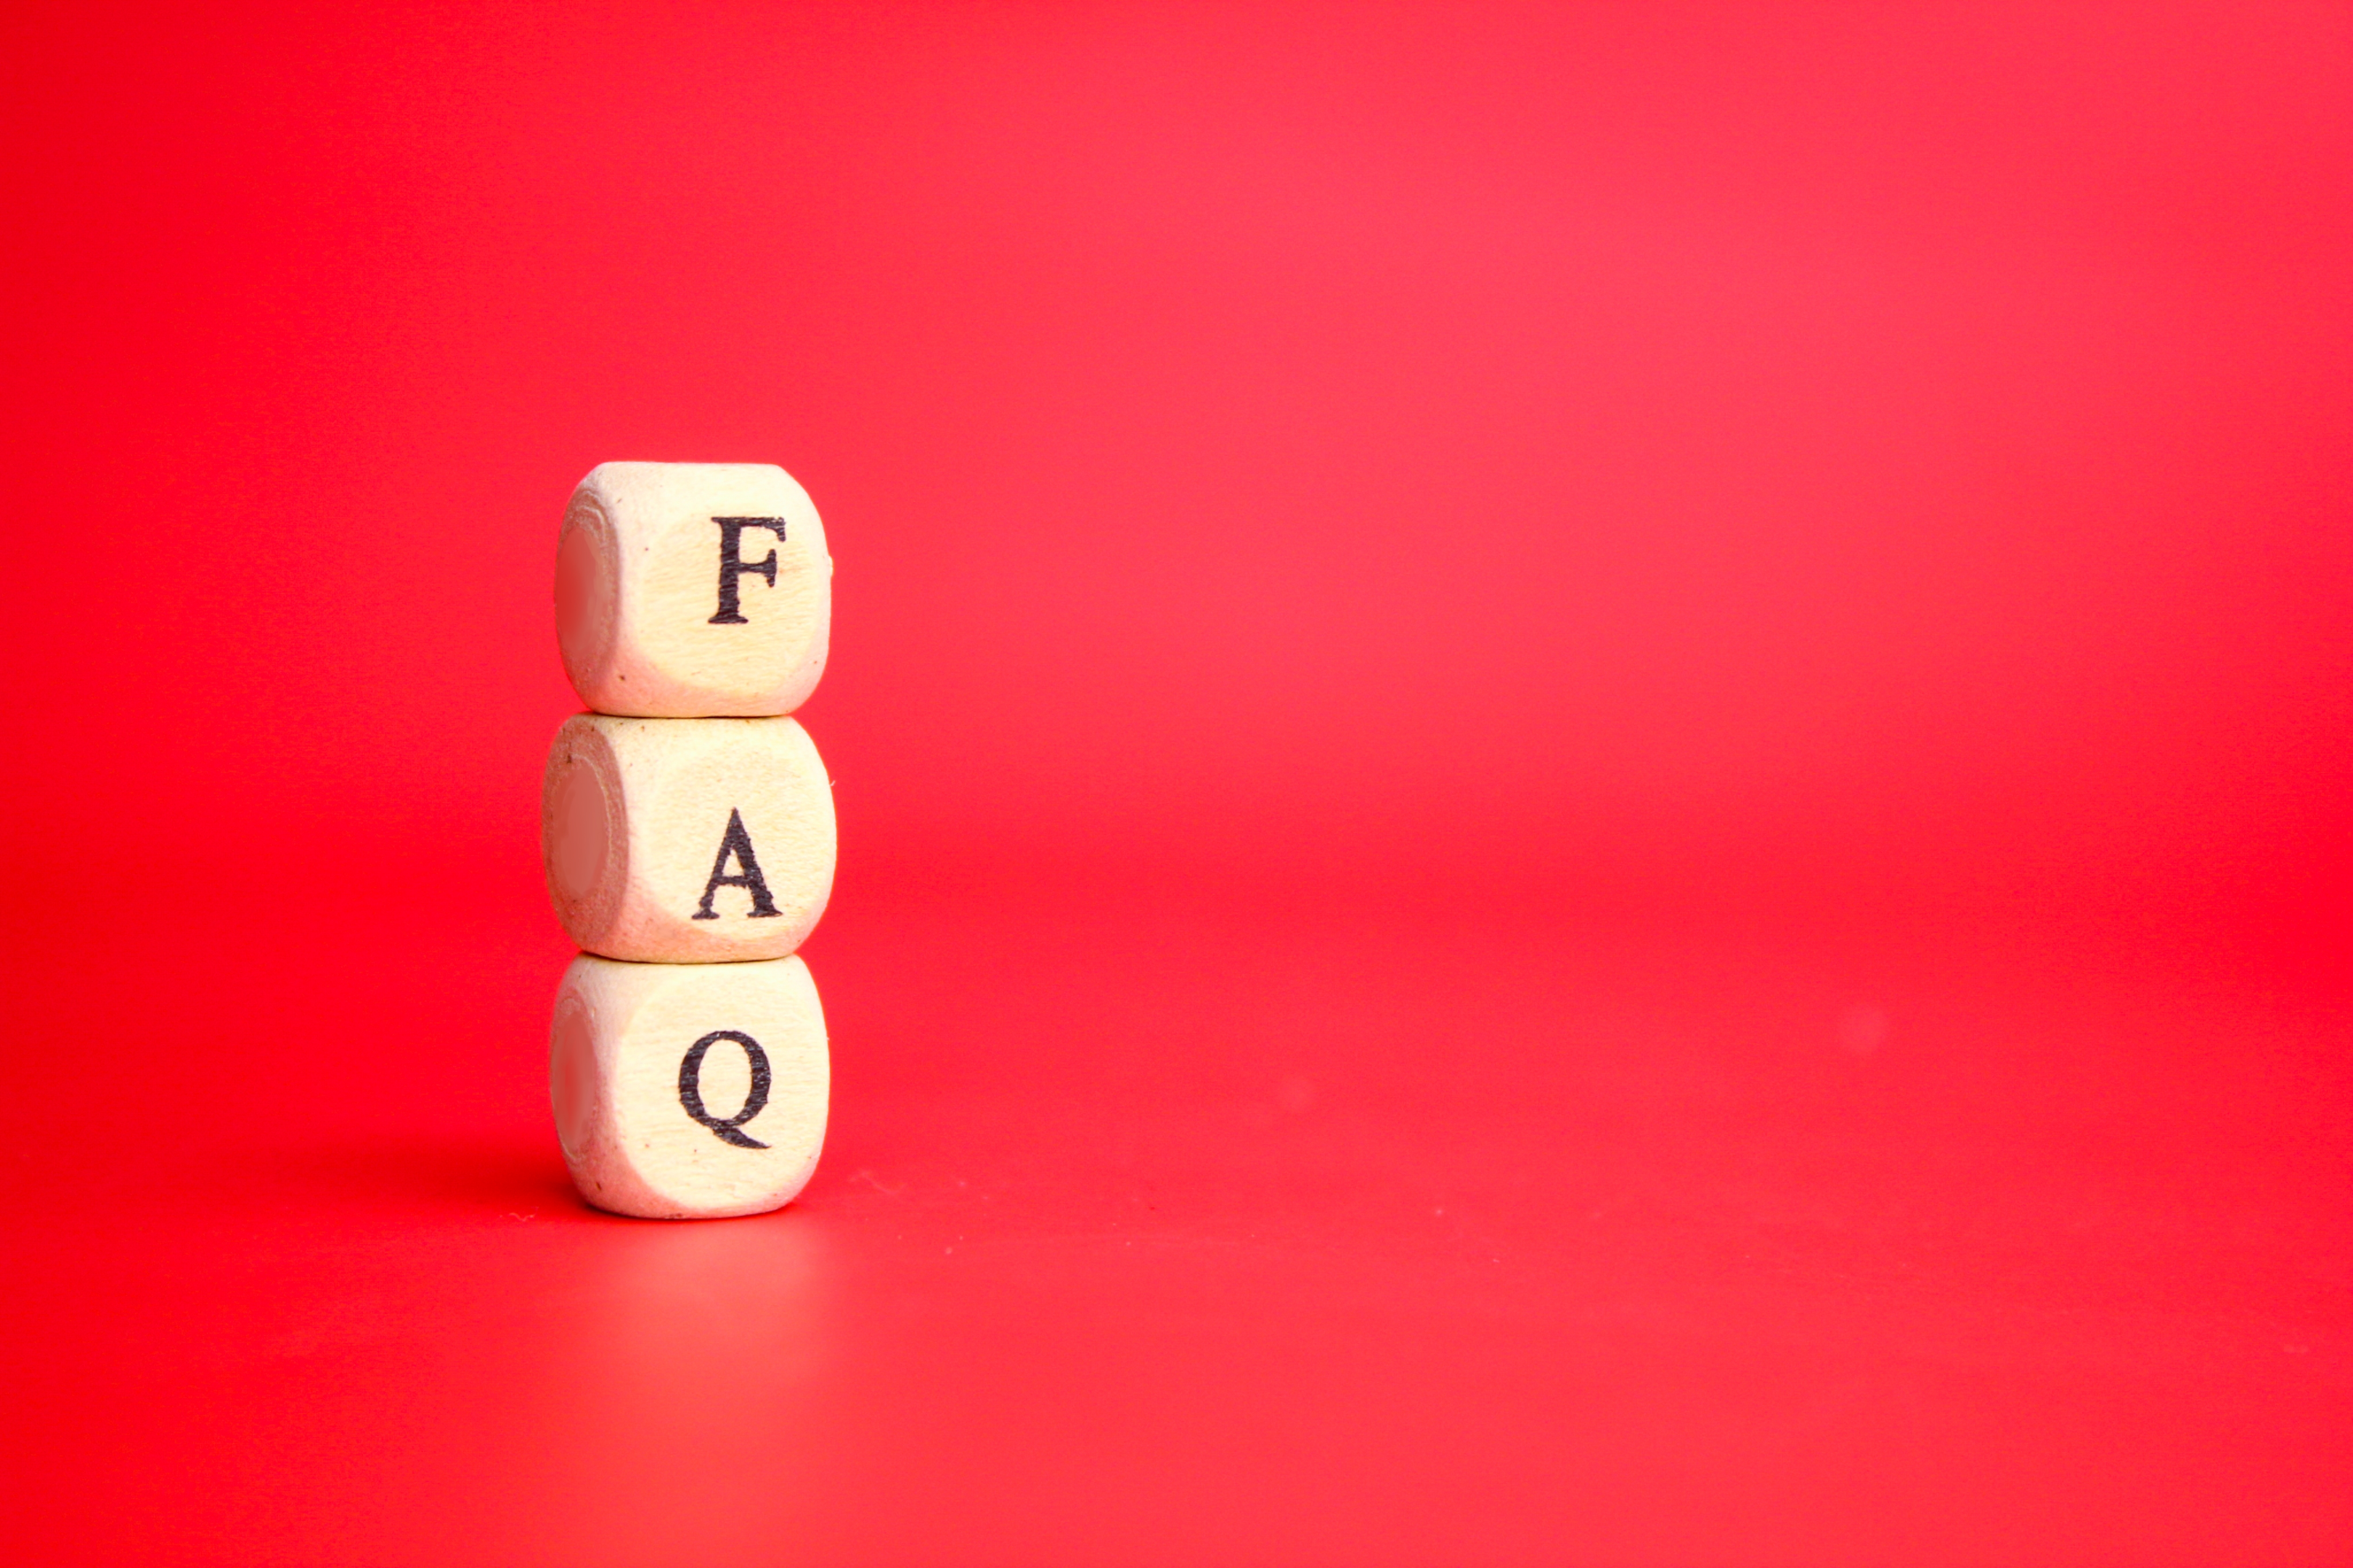 "Wooden cube displaying 'FAQ' – delving into frequently asked questions."